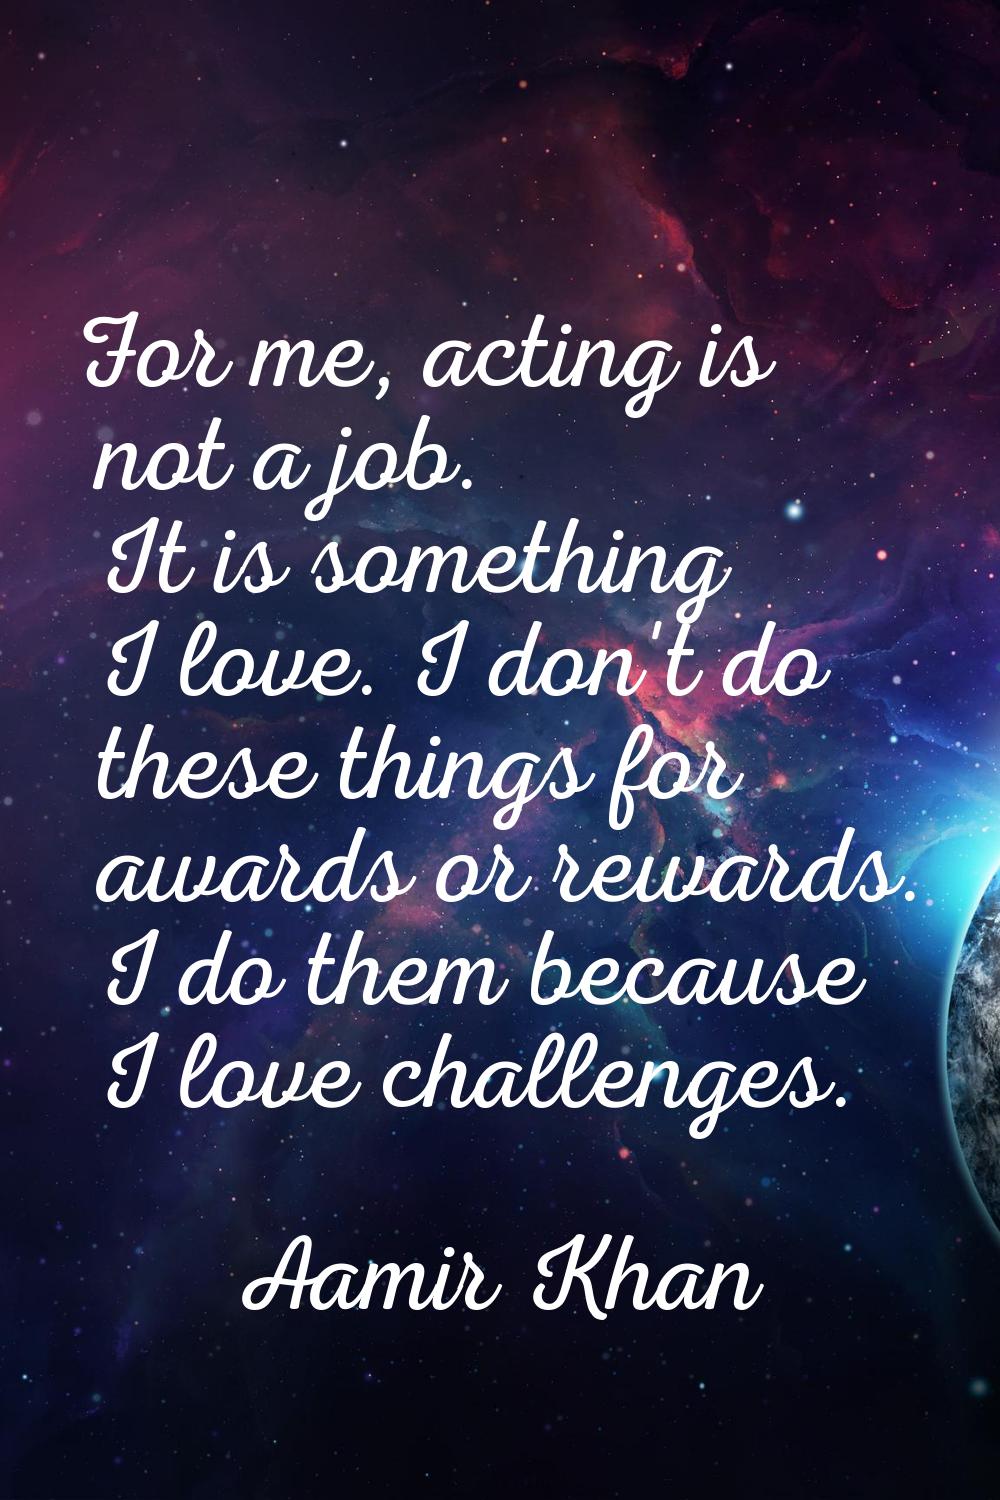 For me, acting is not a job. It is something I love. I don't do these things for awards or rewards.